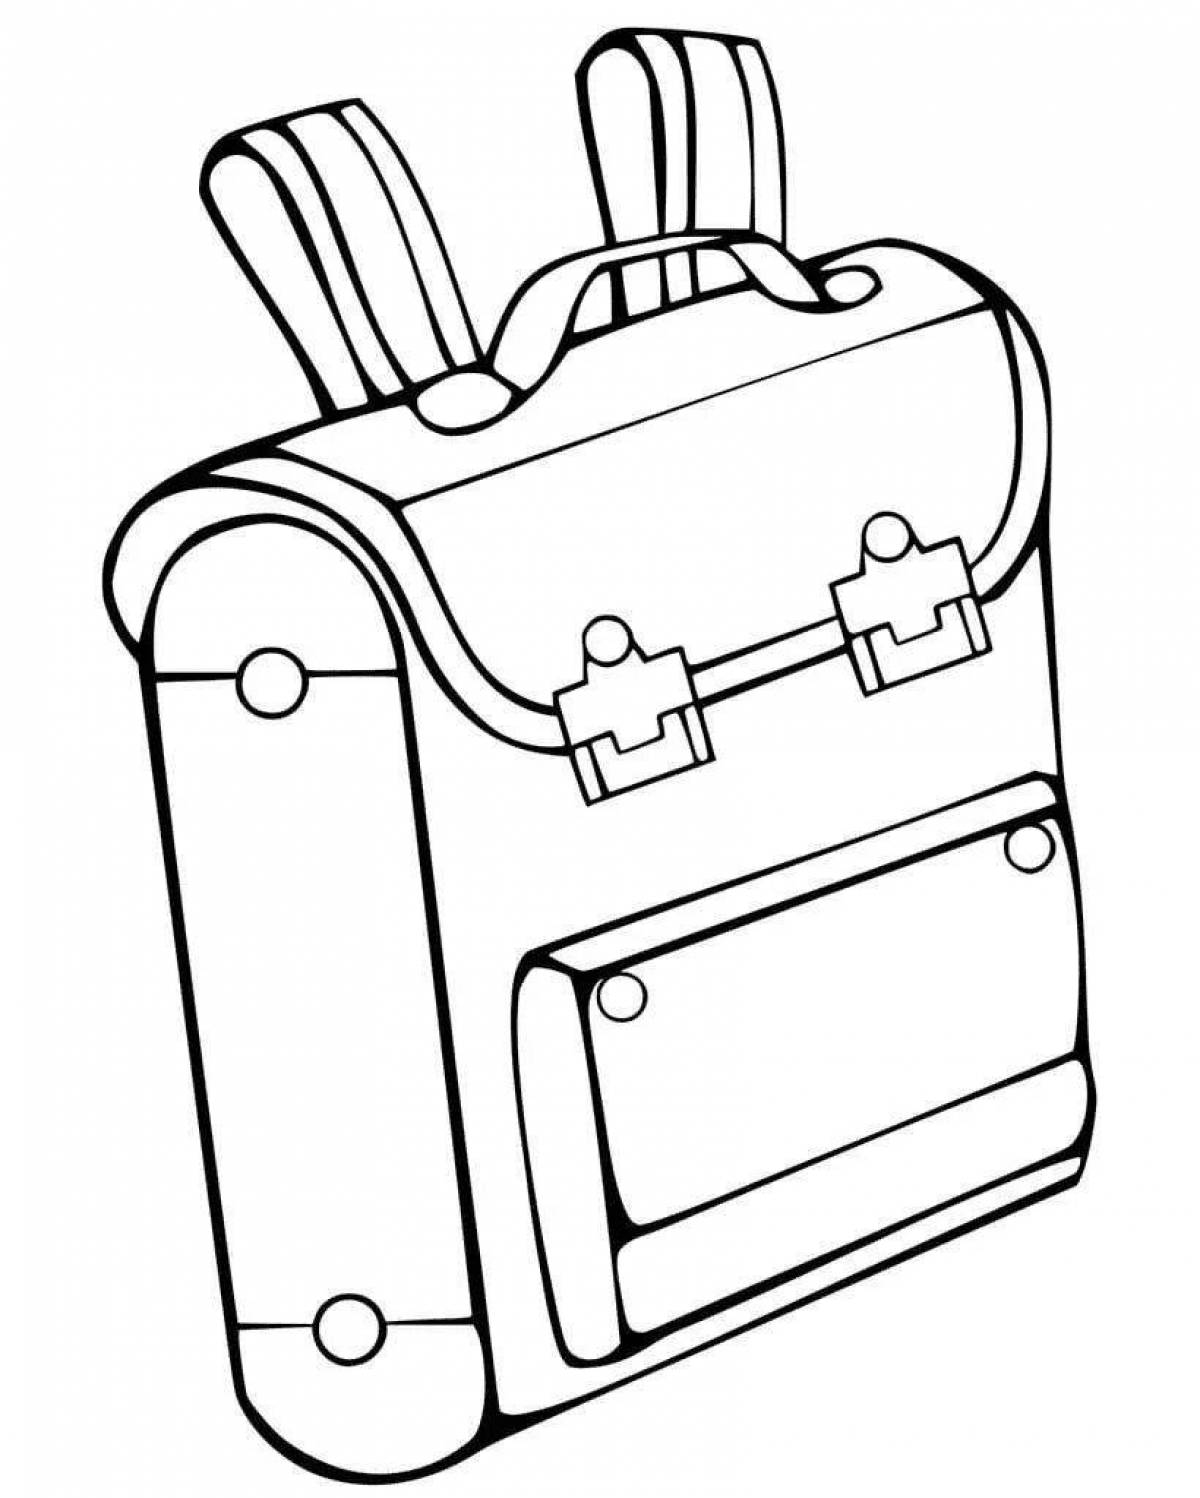 Exciting school bag coloring page